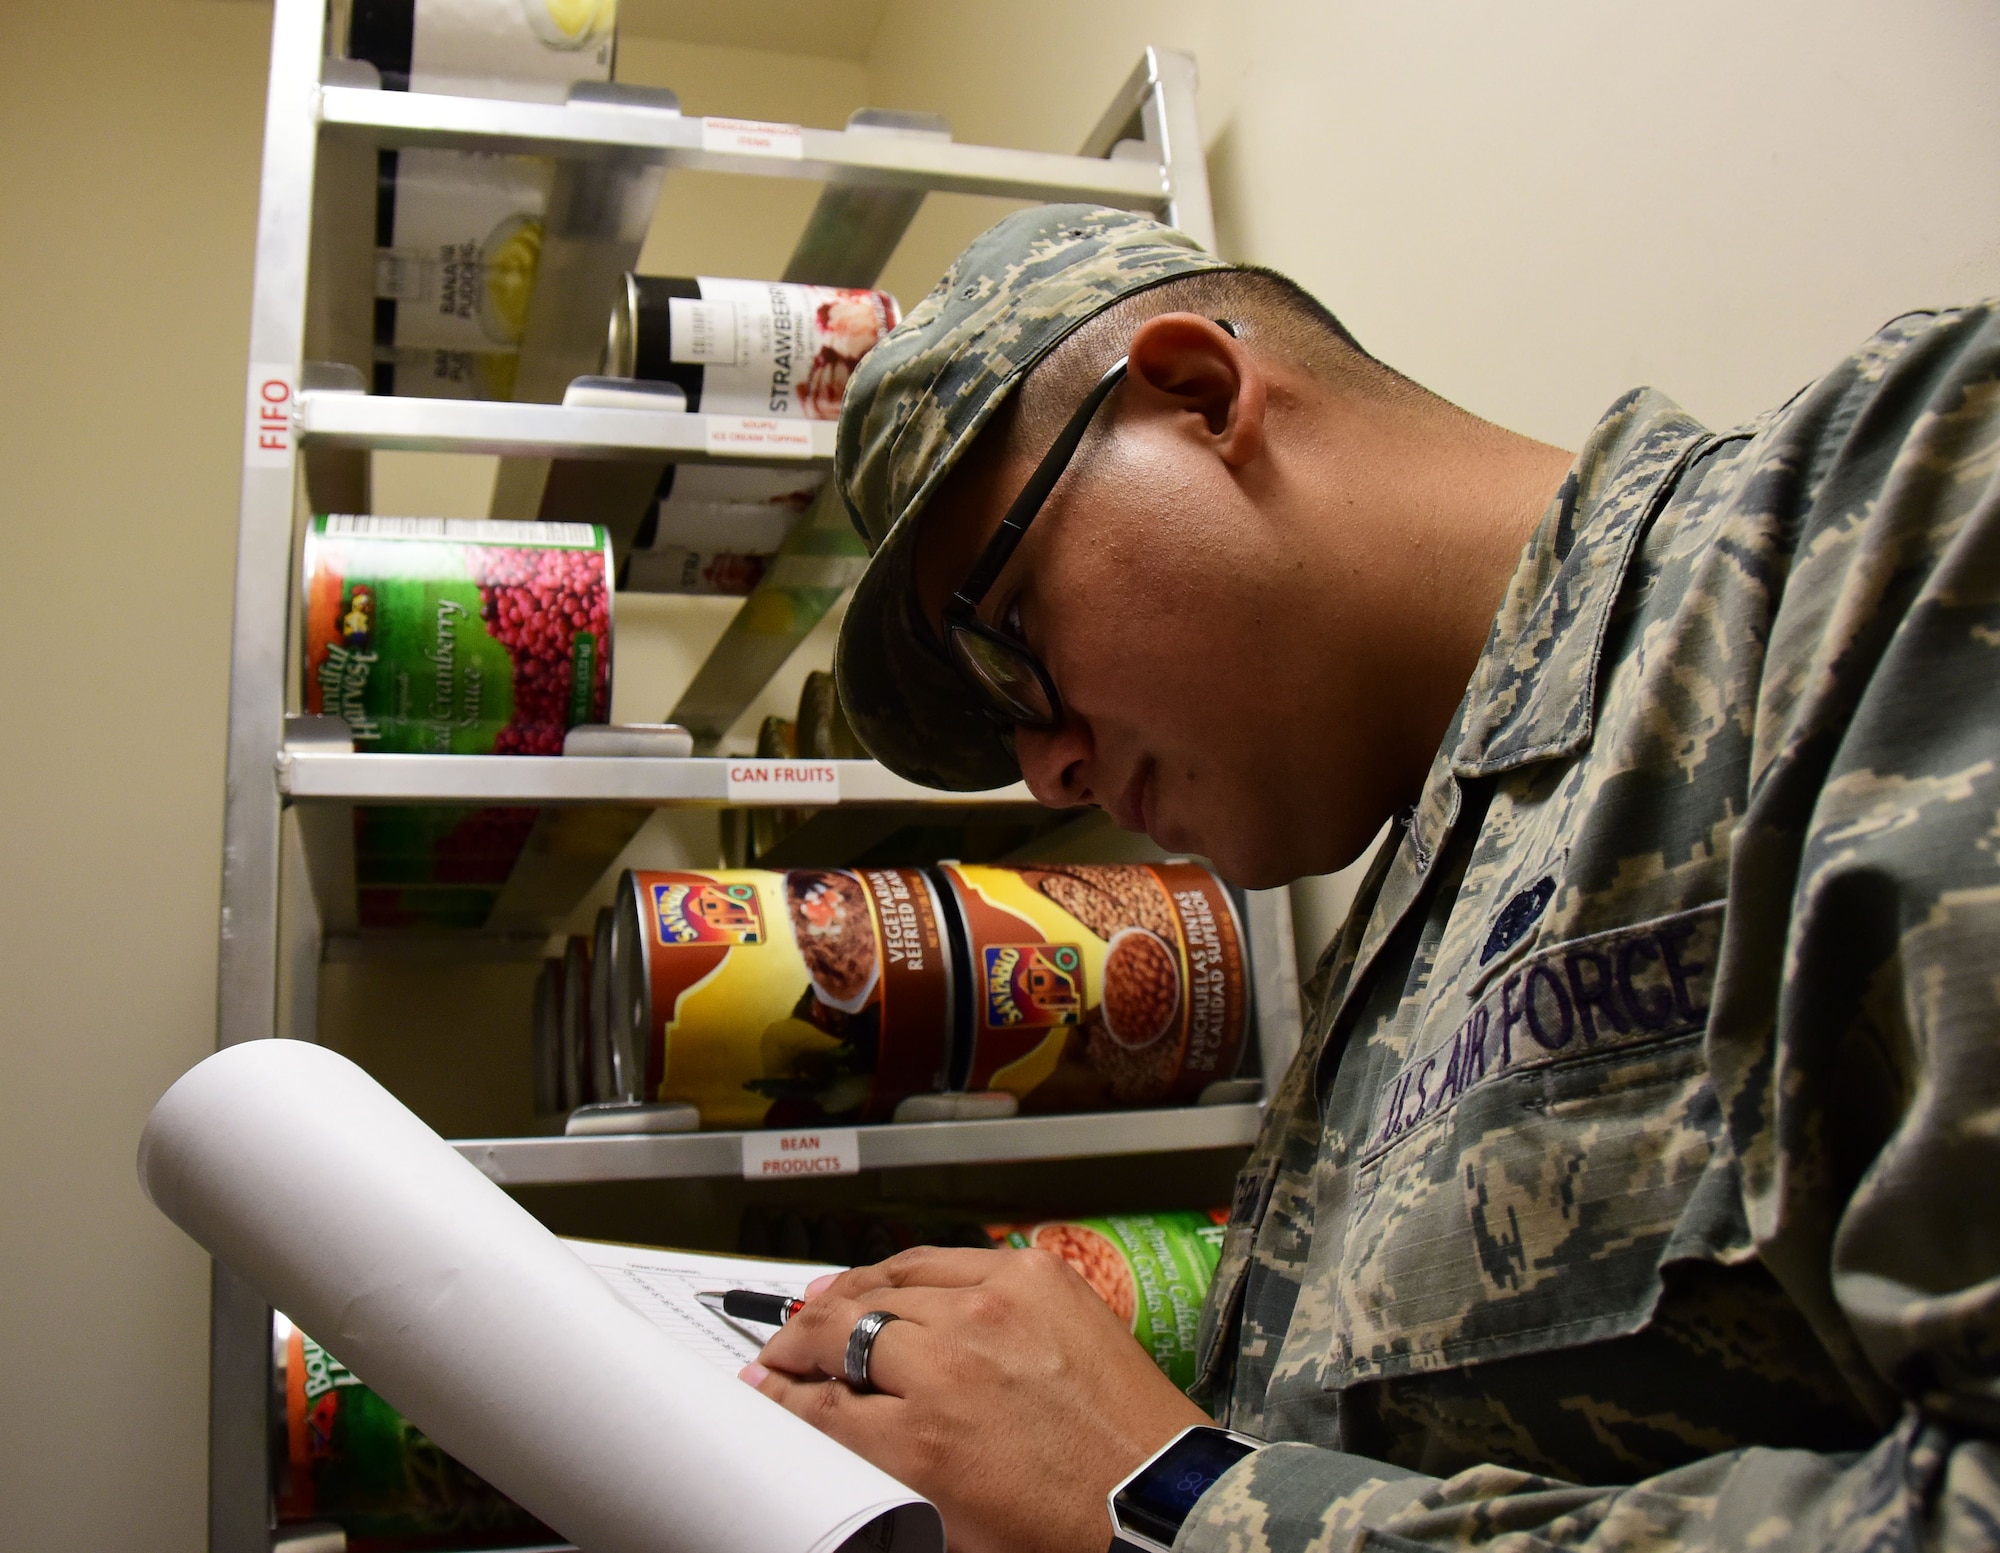 Senior Airman Daniel Gonzalez Hernandez, a services journeyman with the 118th Force Support Squadron, checks inventory in the storeroom on October 14, 2018 at Berry Field Air National Guard Base, Nashville, Tennessee.